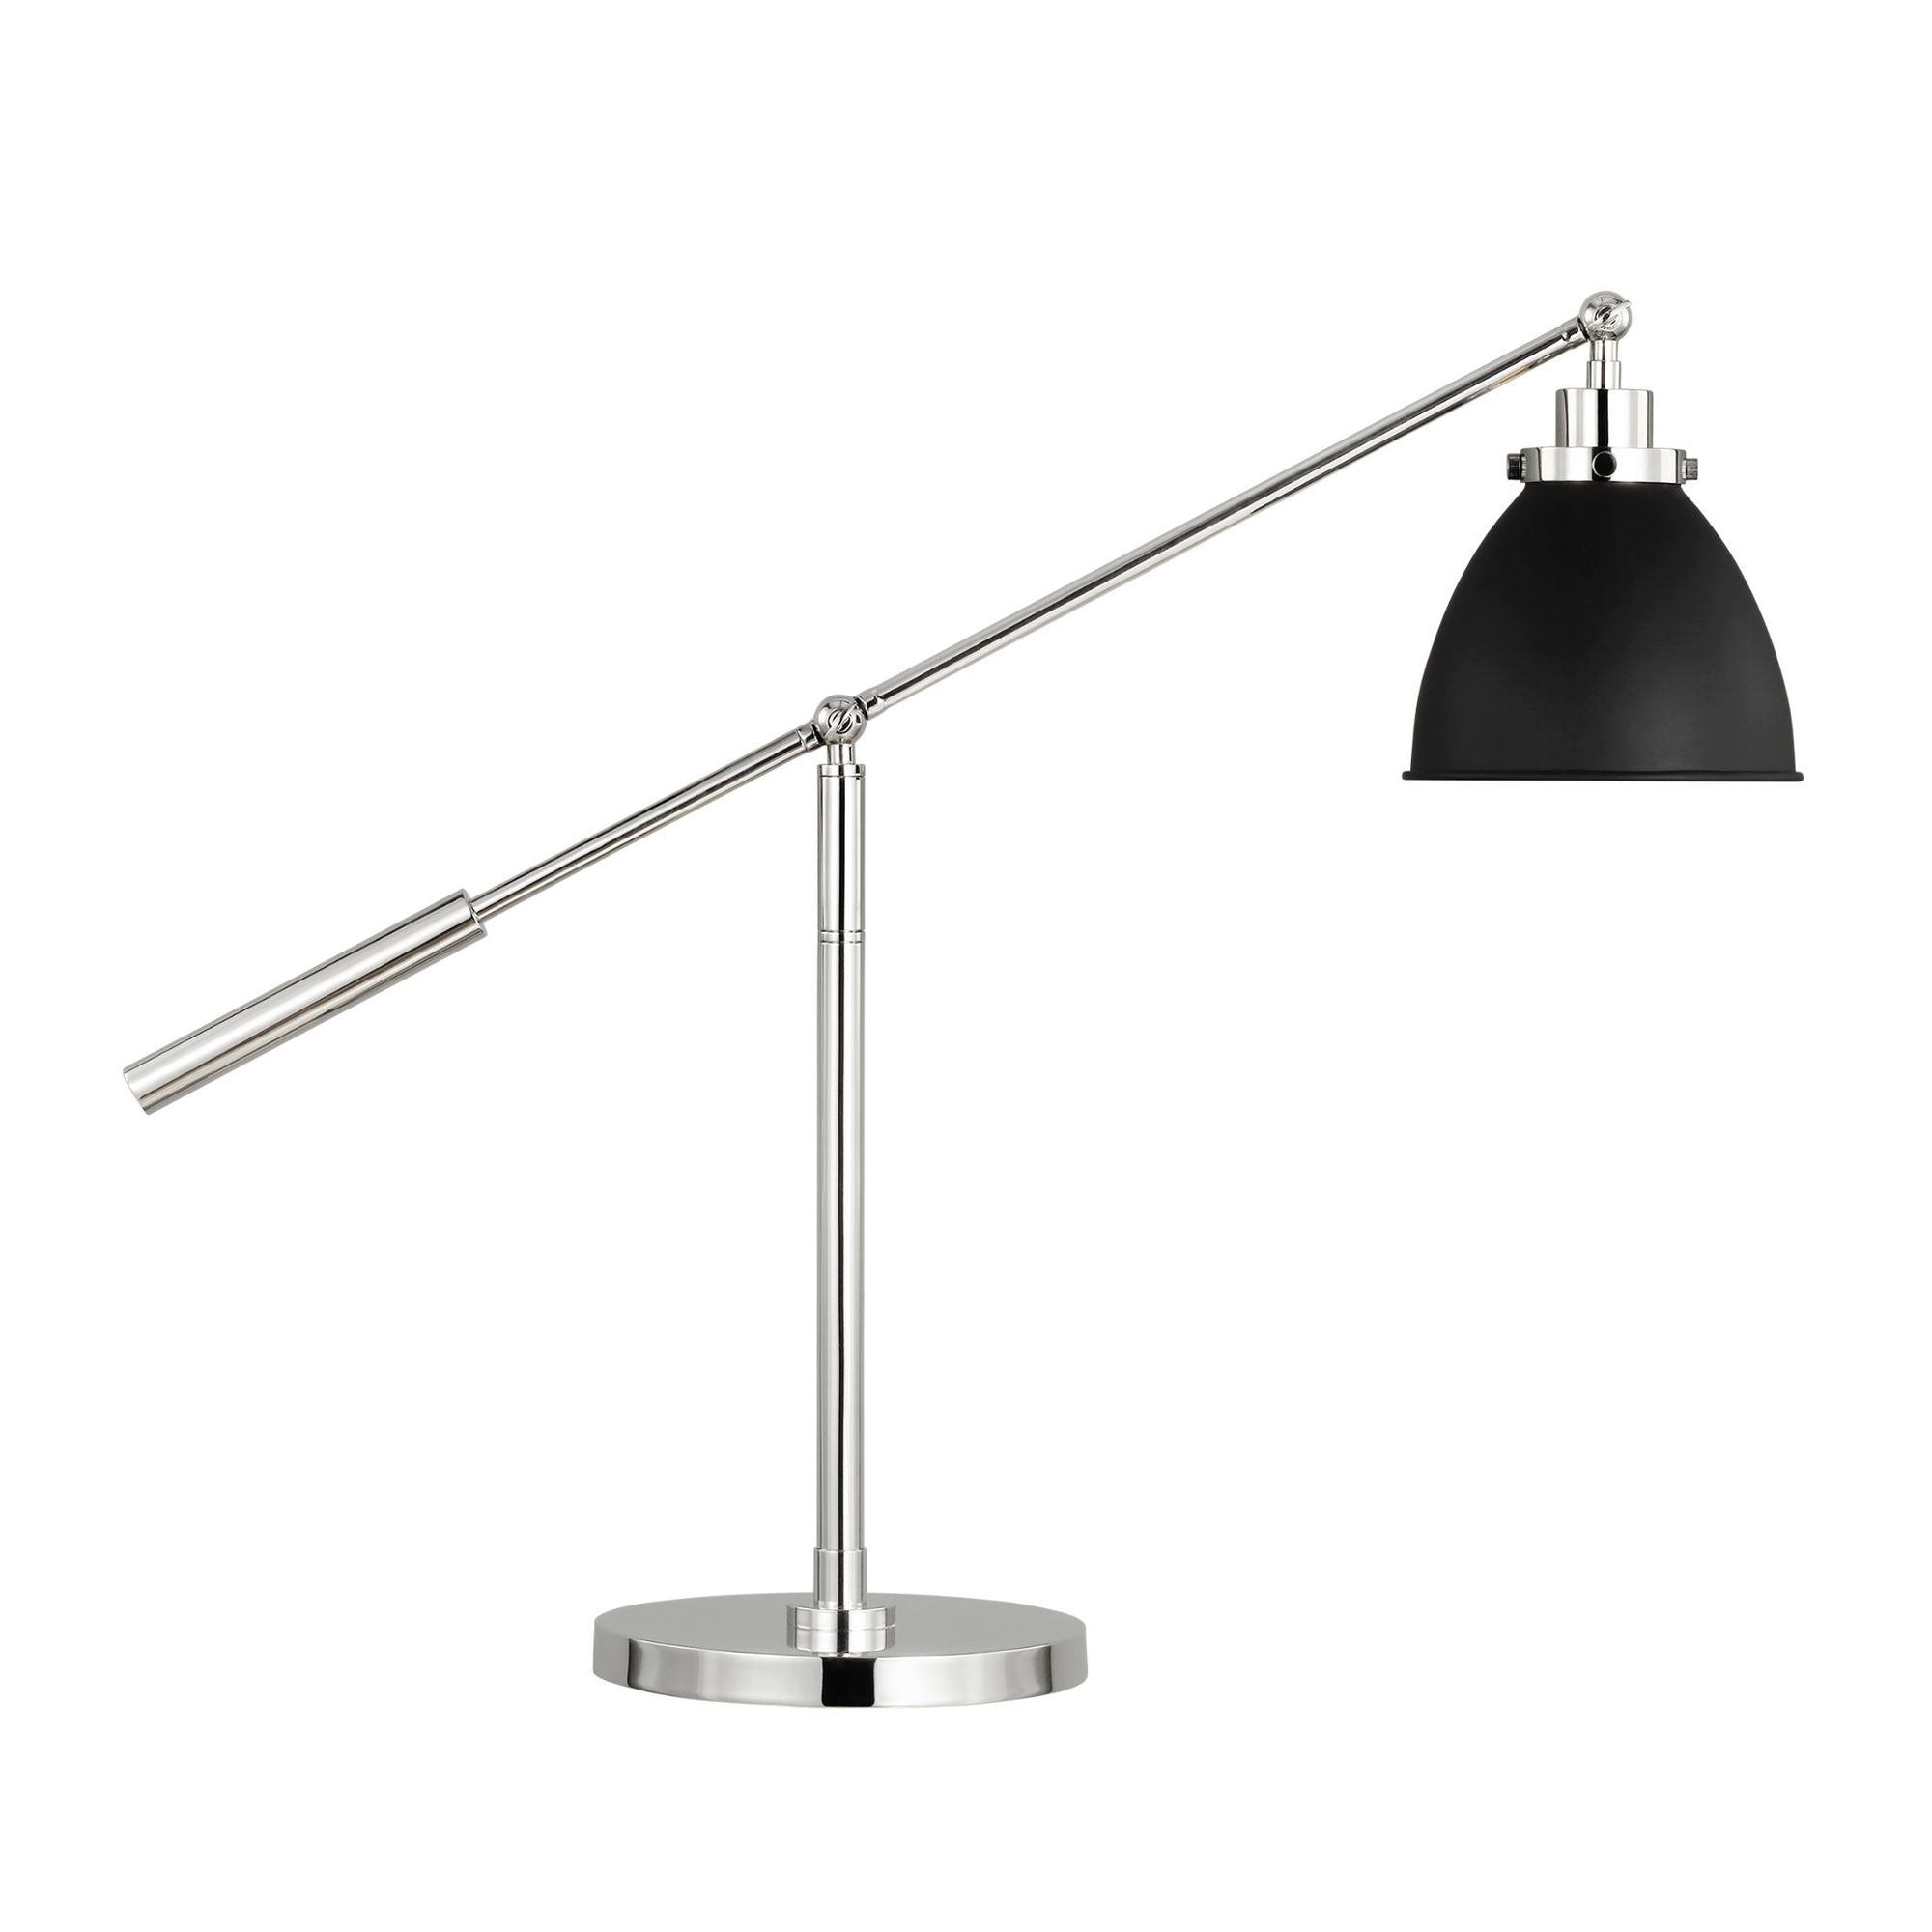 Chapman & Myers Wellfleet Dome Desk Lamp in Midnight Black and Polished Nickel